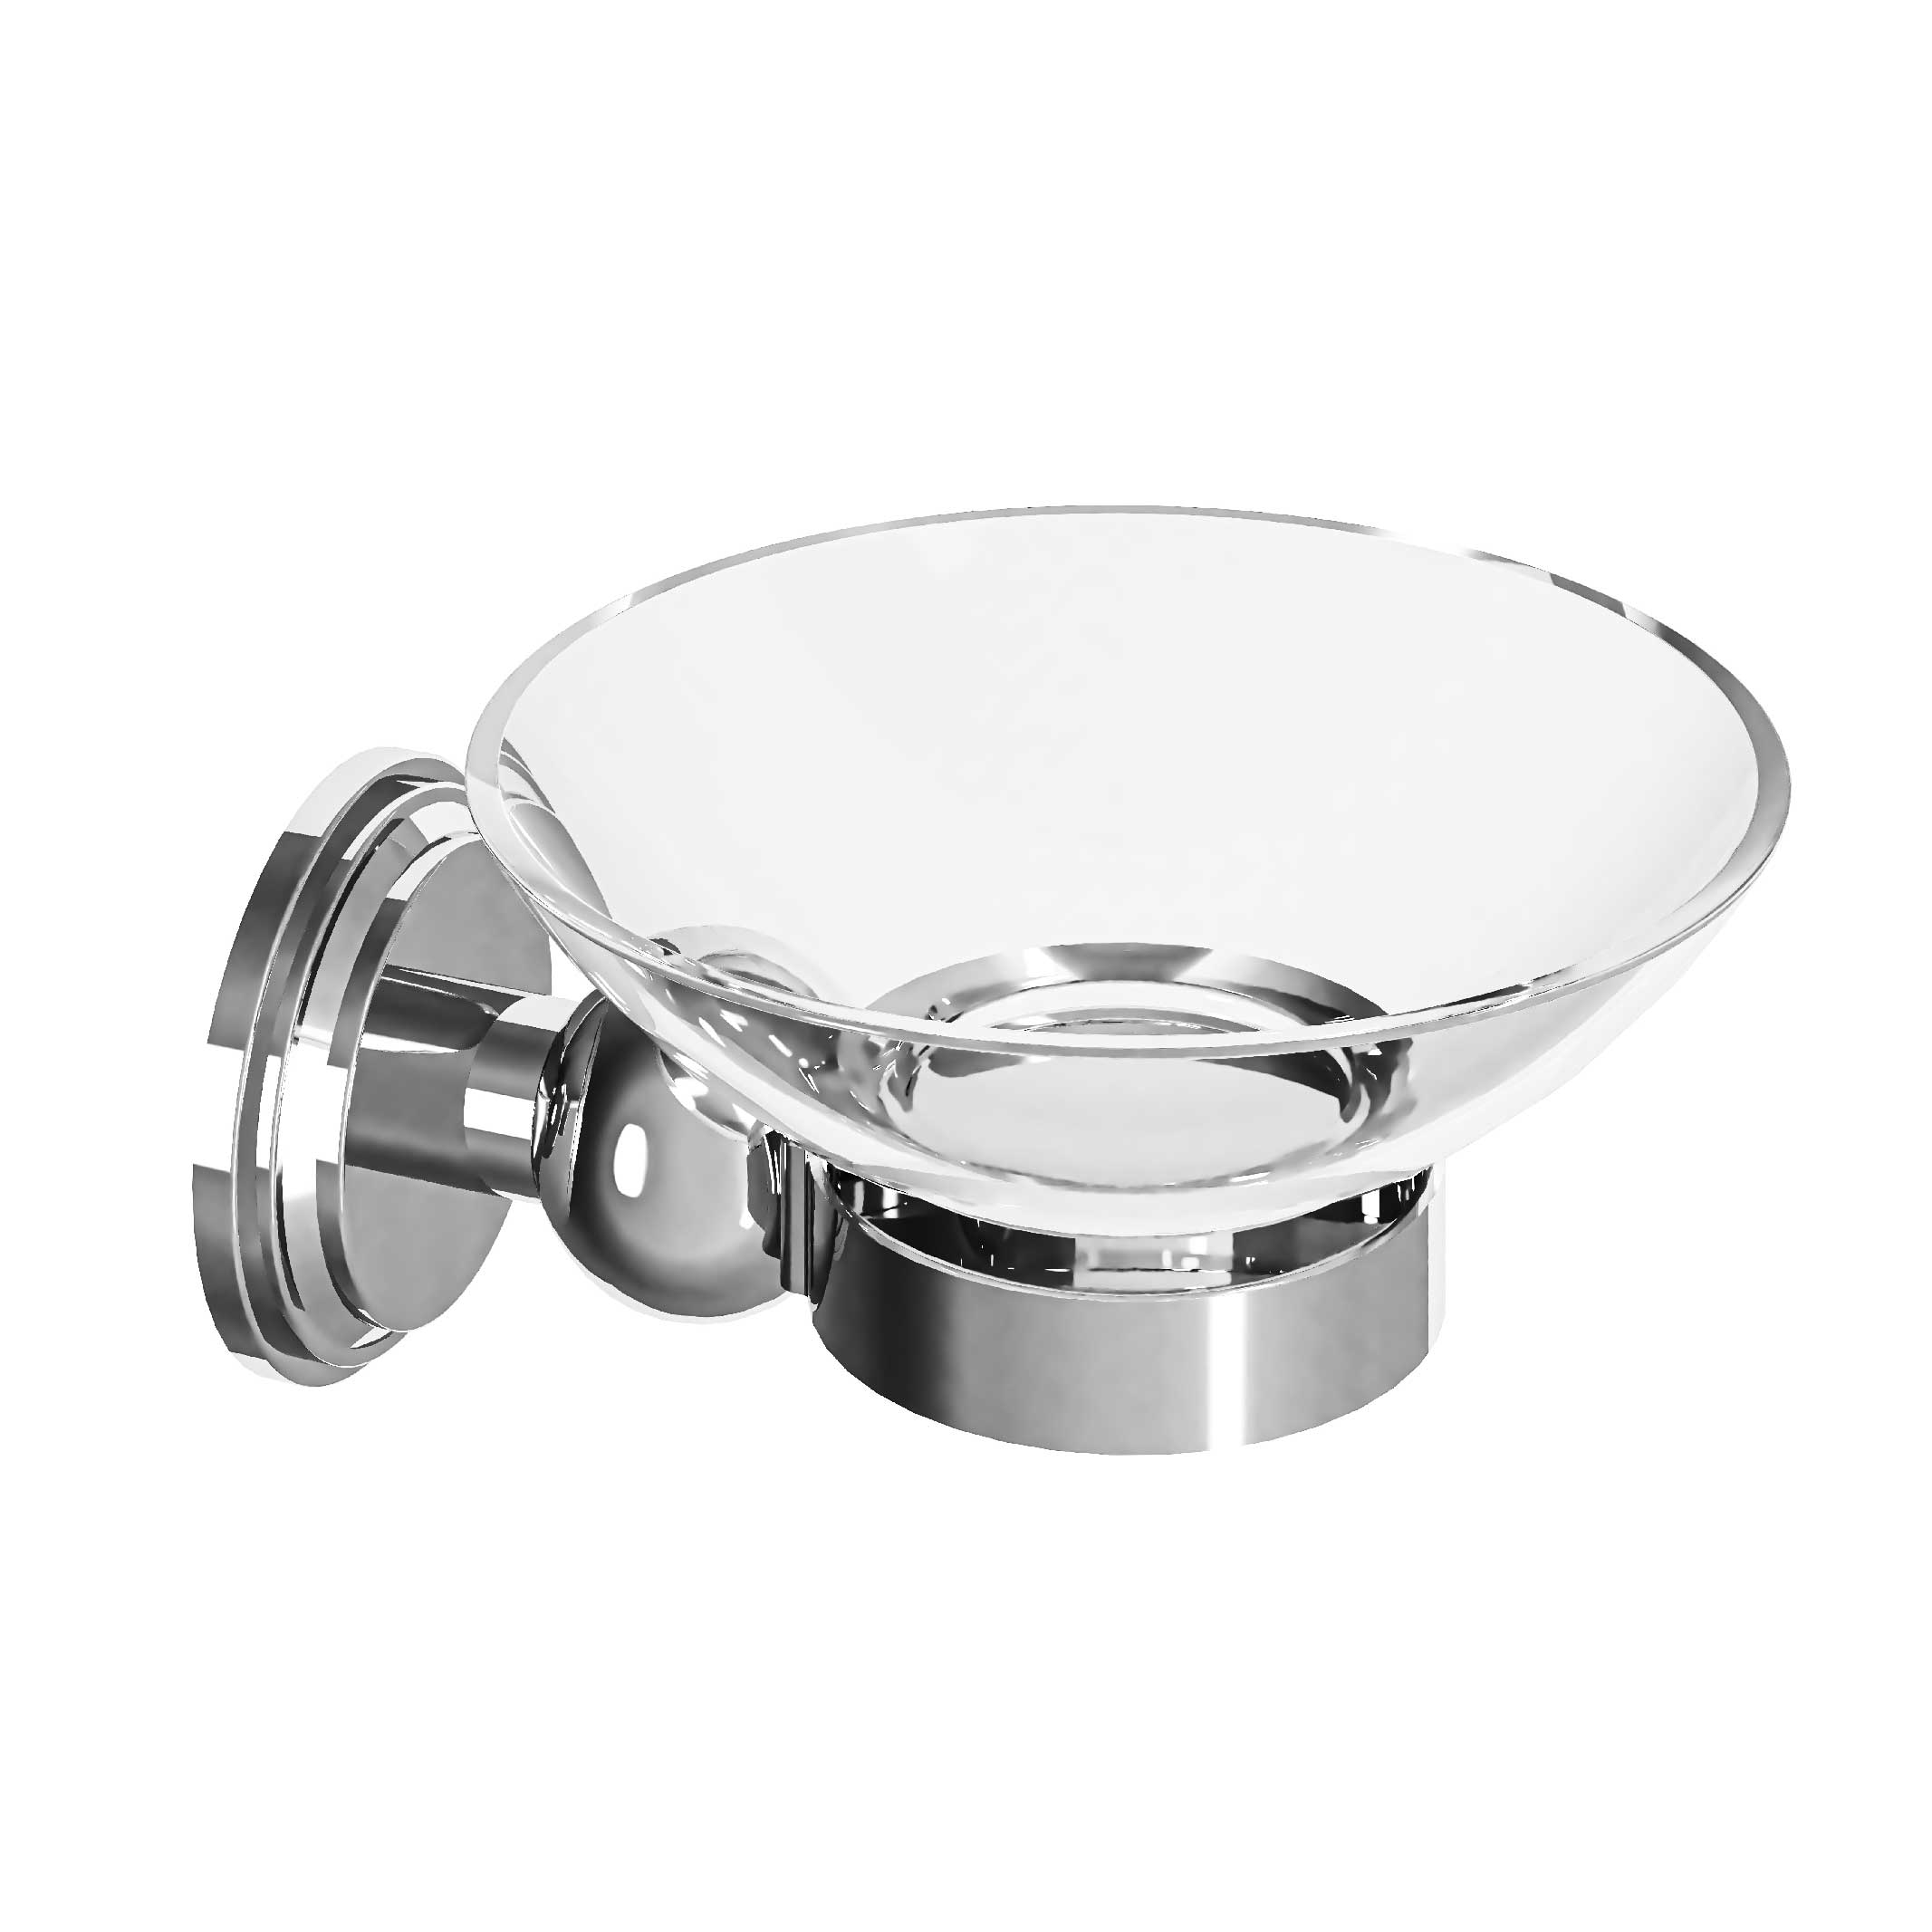 M60-515 Wall mounted soap dish holder